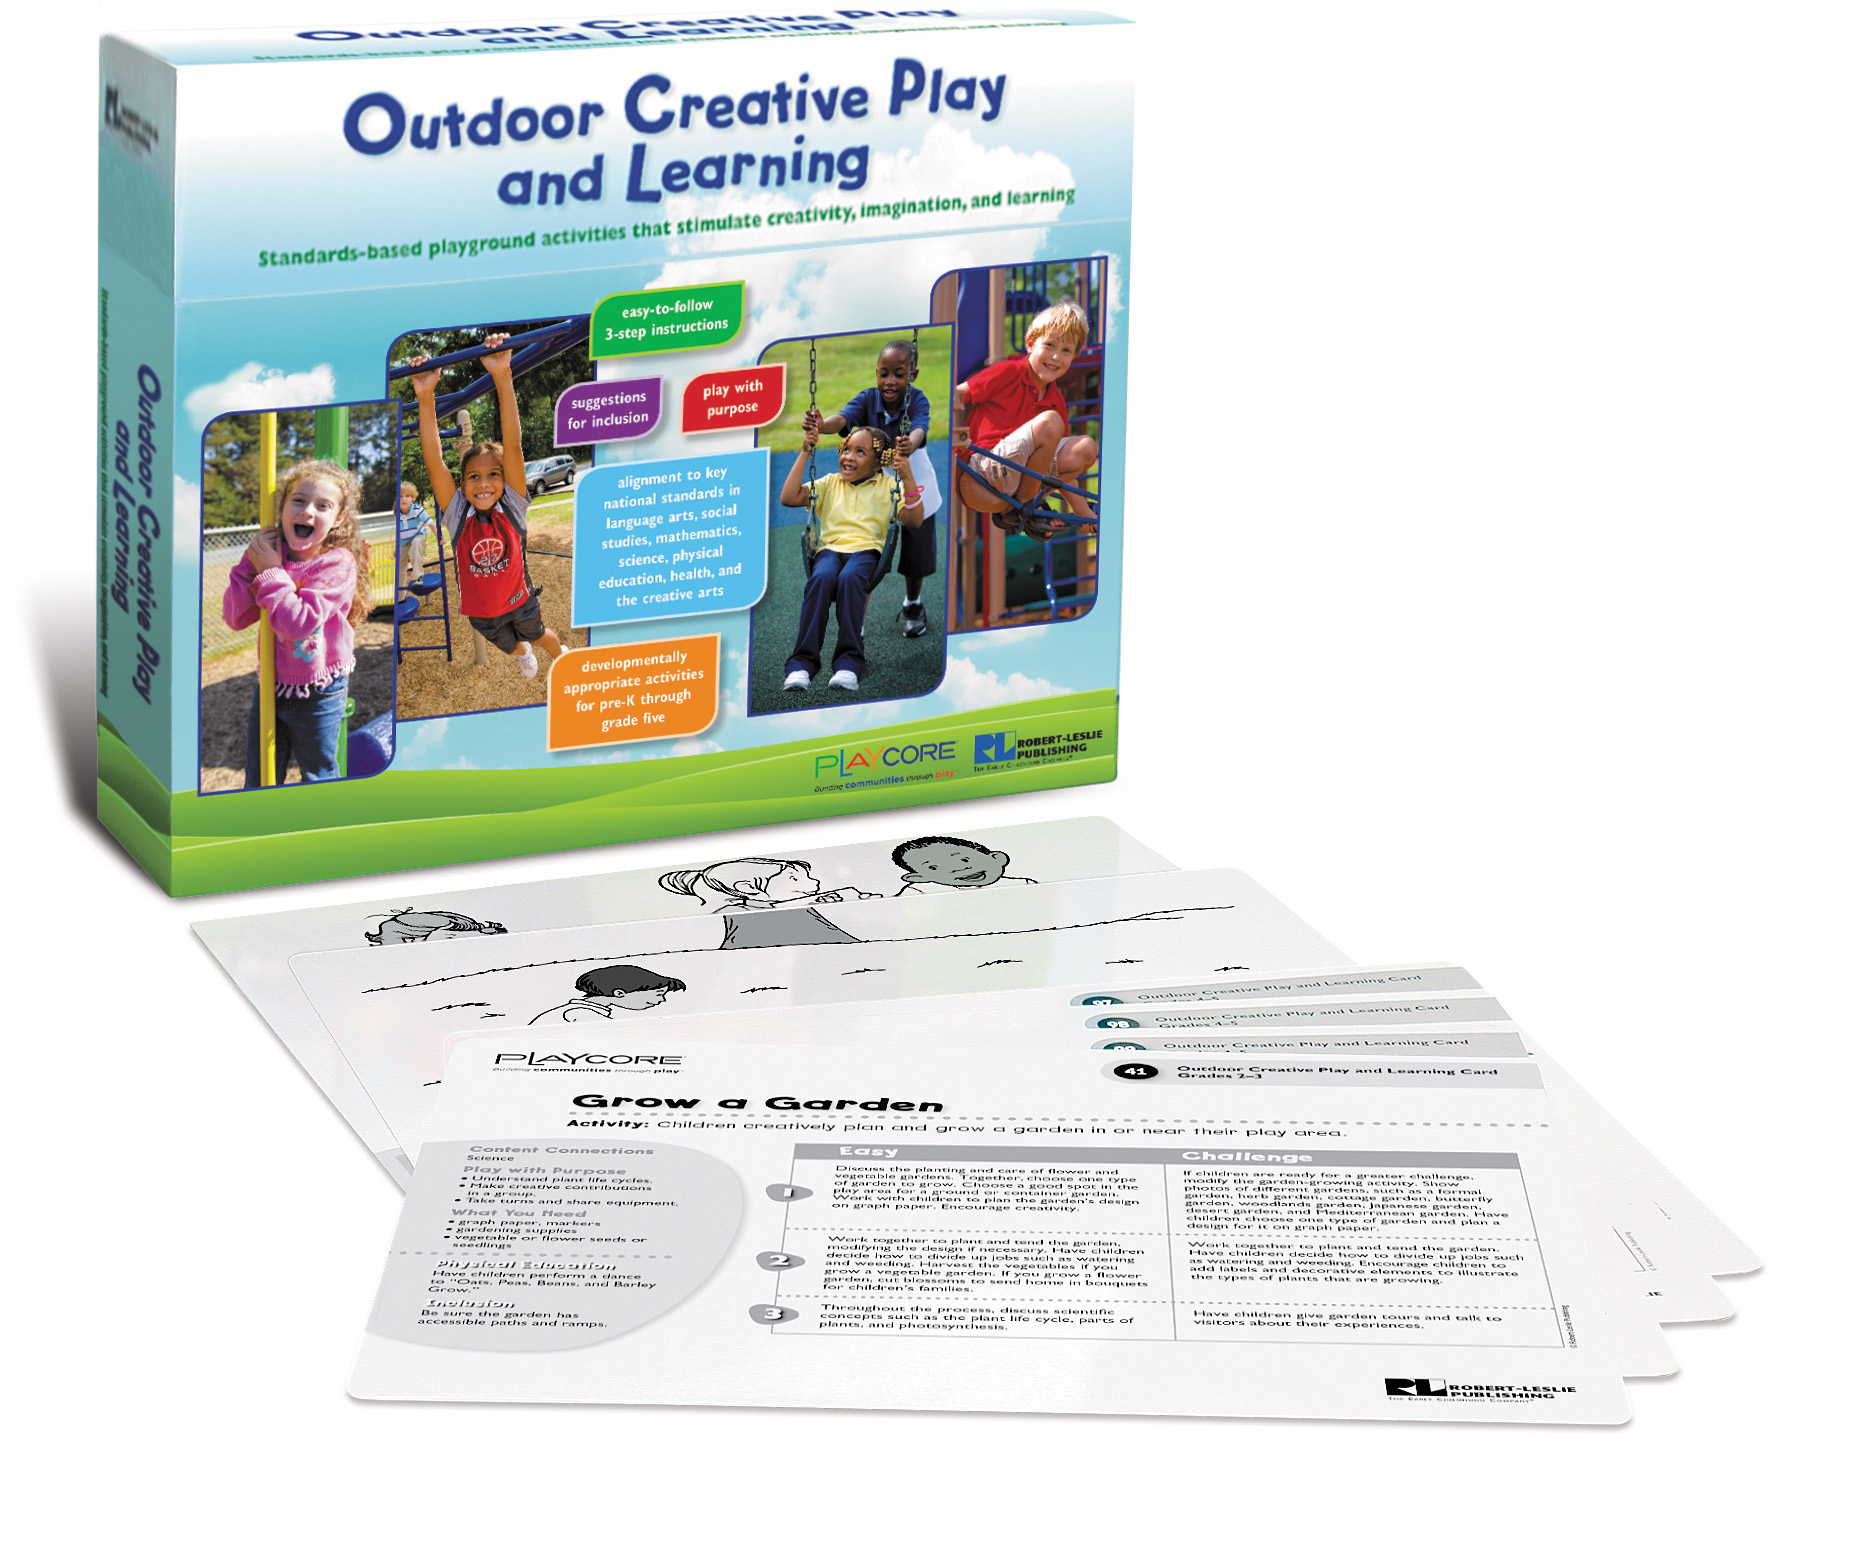 Outdoor Creative Play and Learning kit with interactive paper activities laid out in front of it